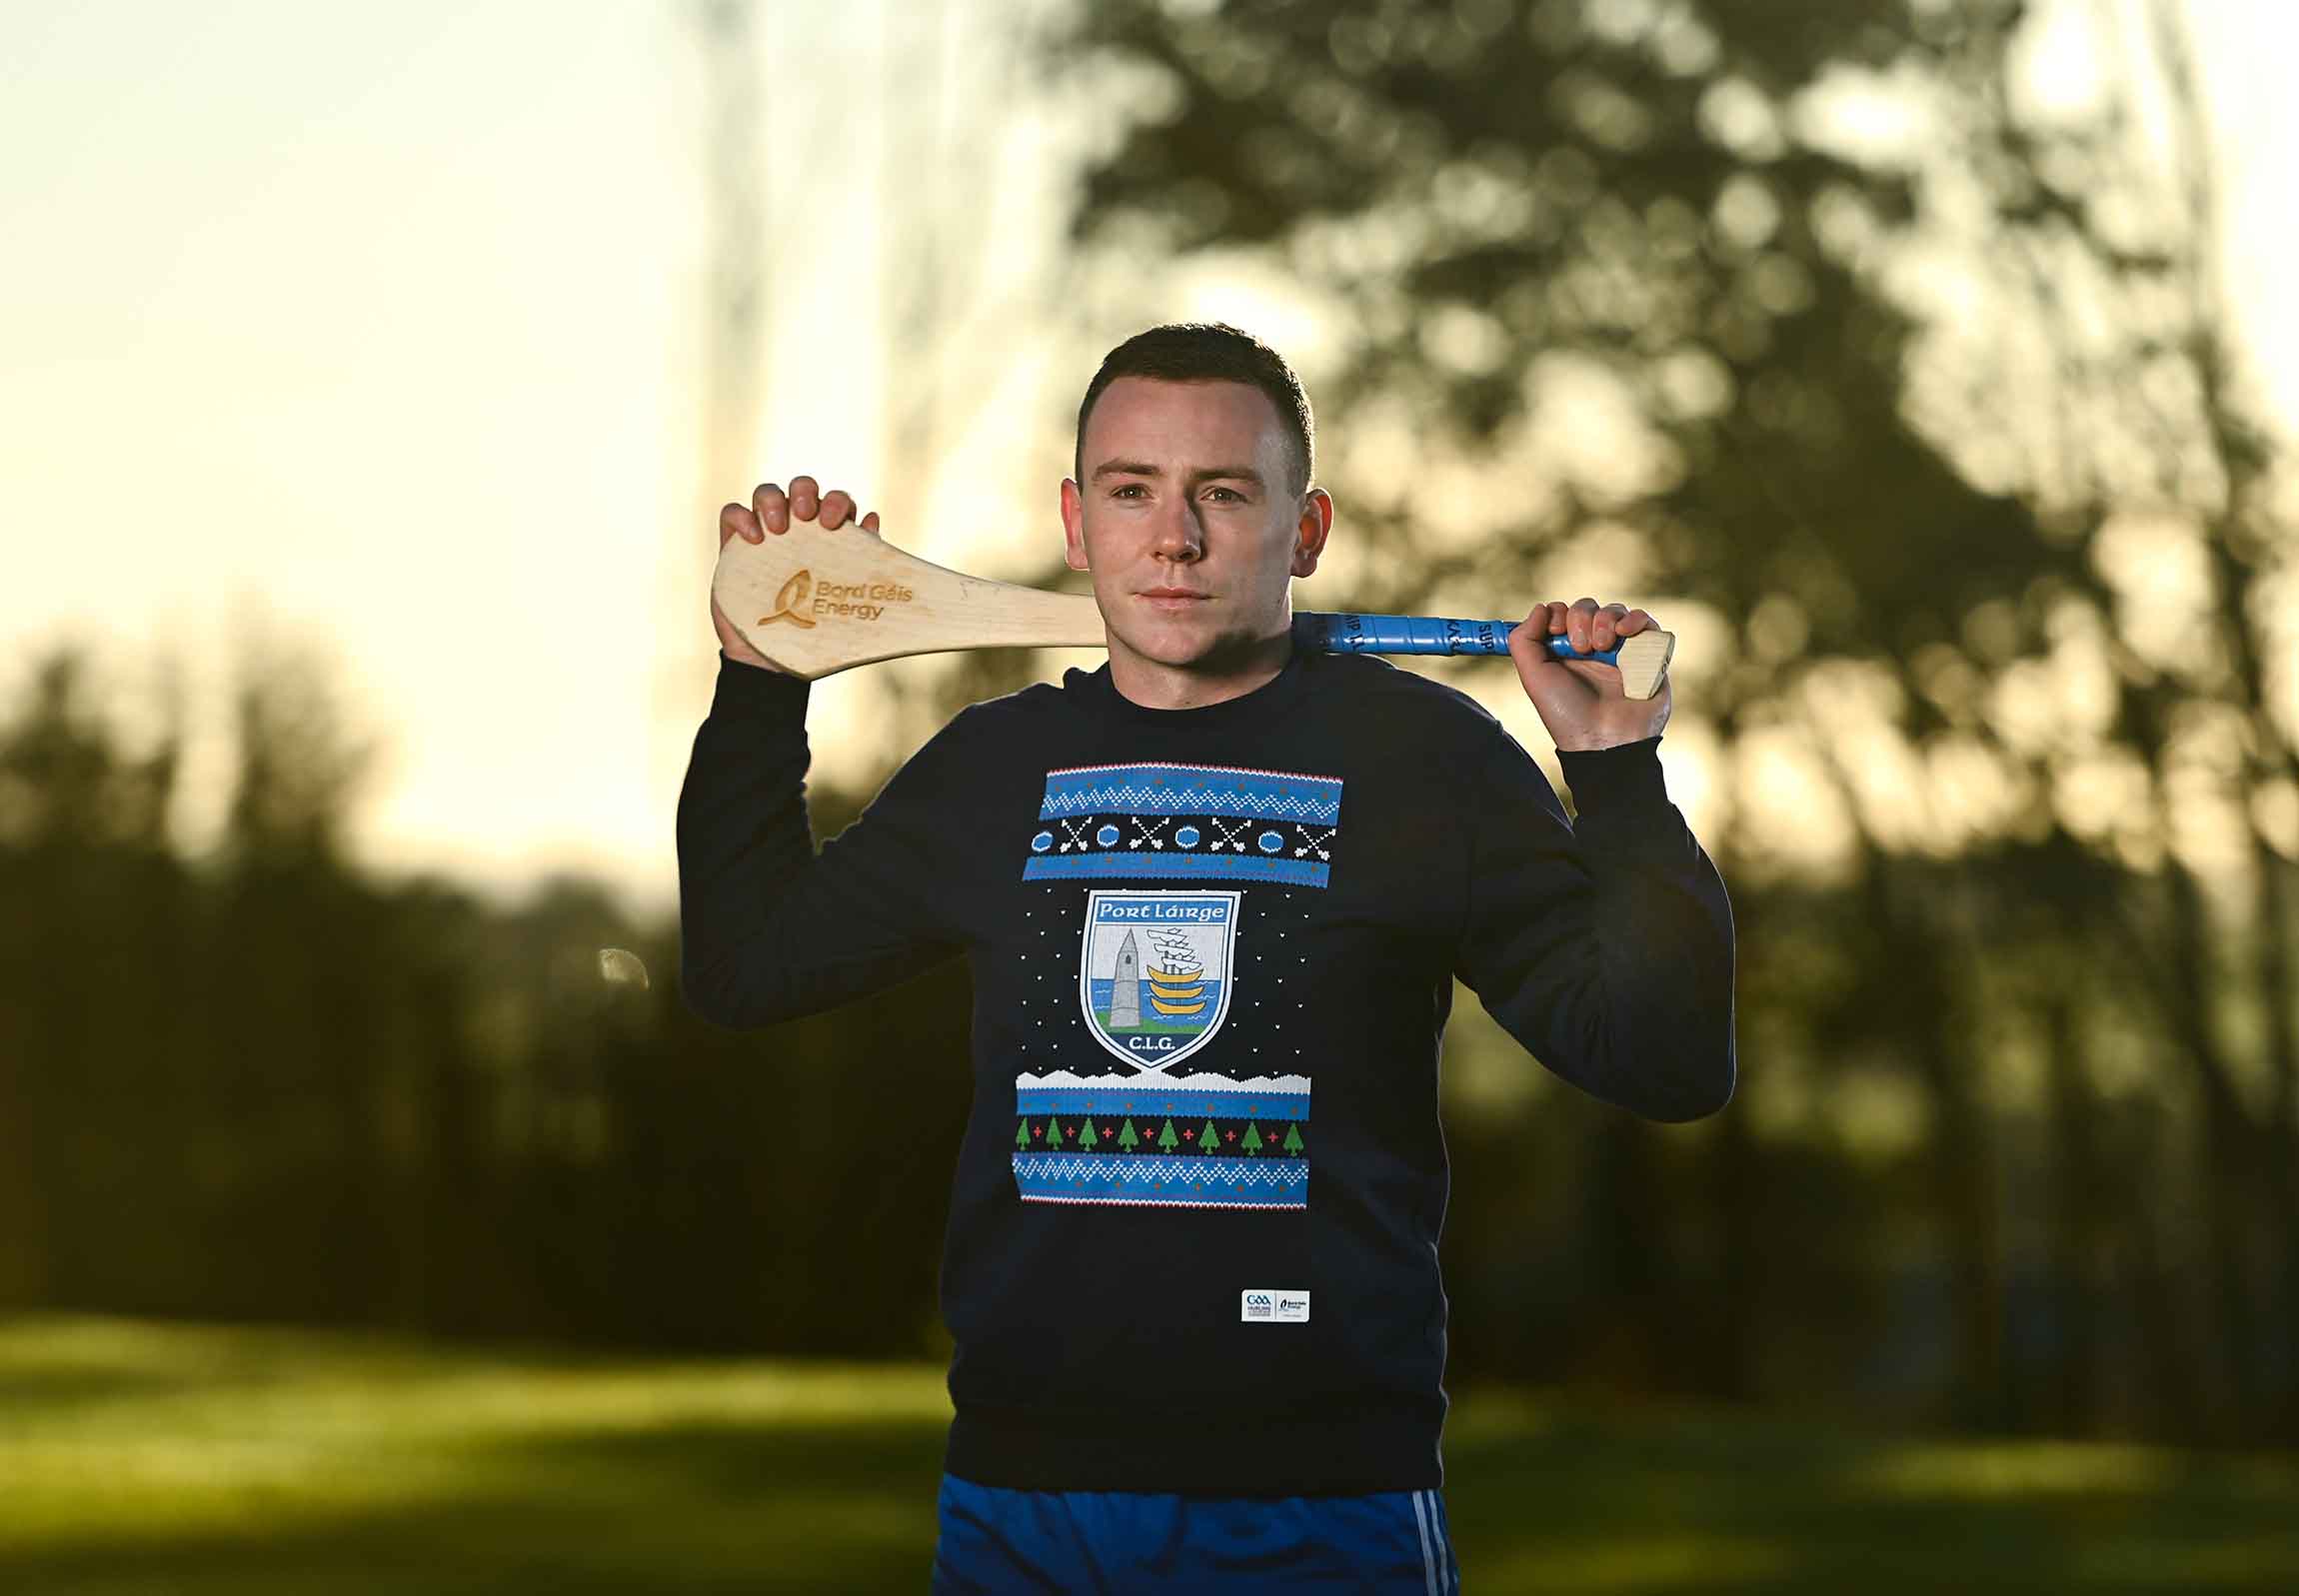 Stephen Bennett of Waterford, wearing a Bord Gáis Energy jumper.